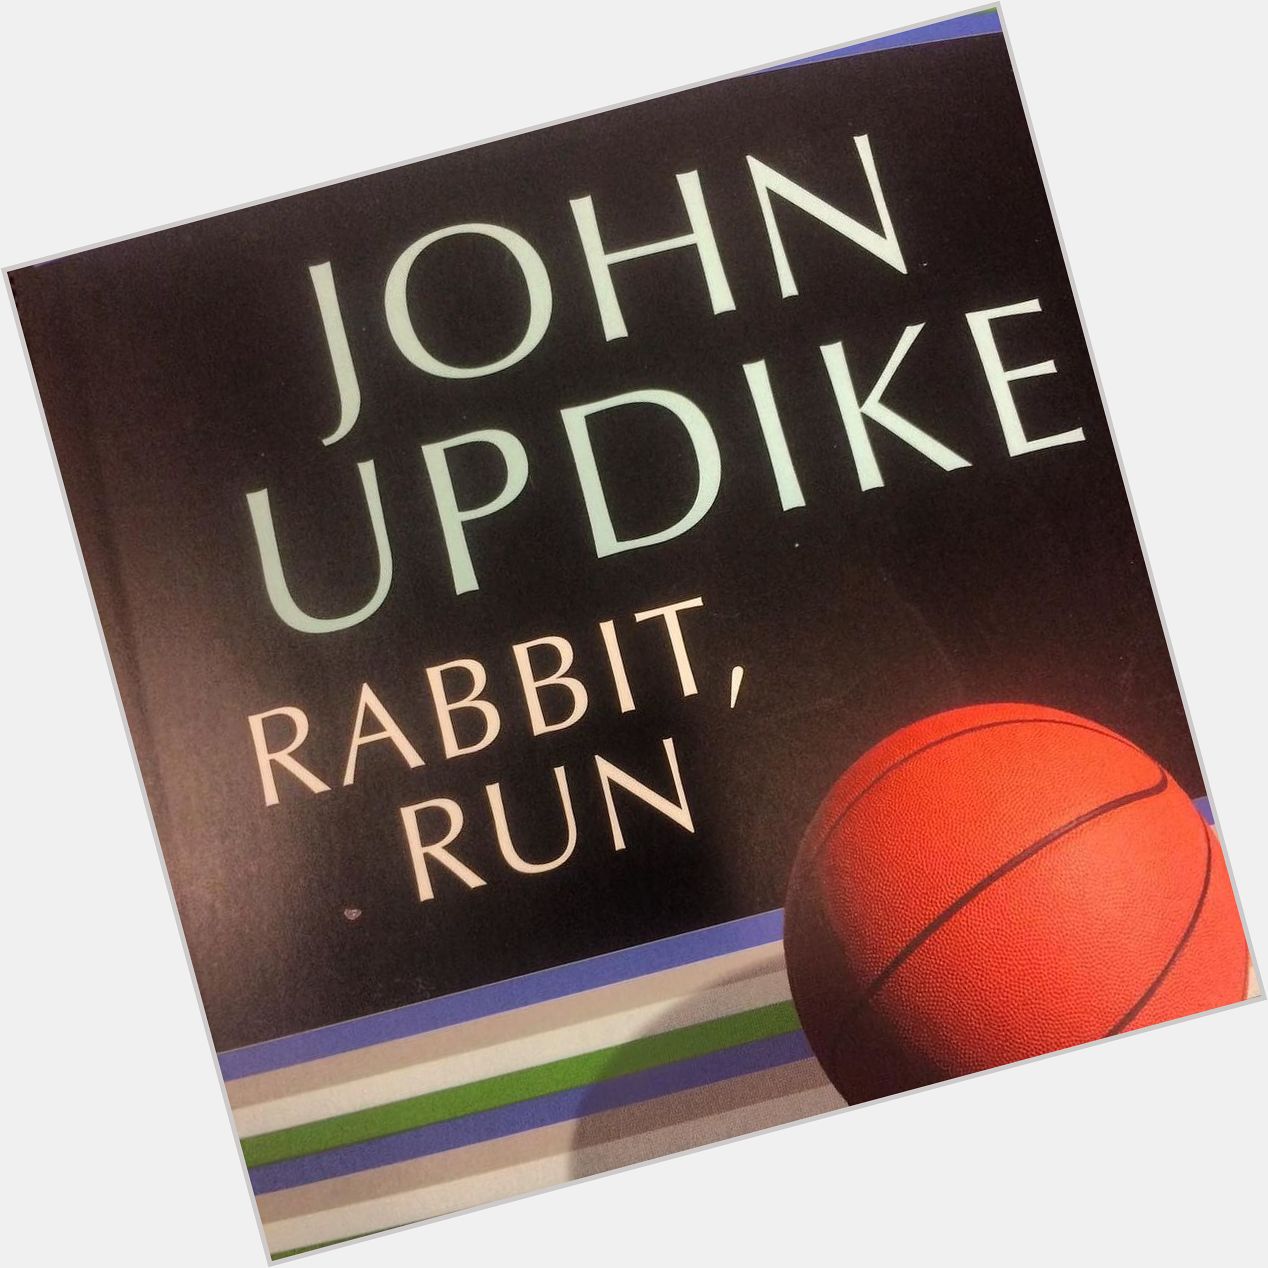 Happy birthday John Updike! One of the few writers to win multiple Pulitzer Prizes, he was 